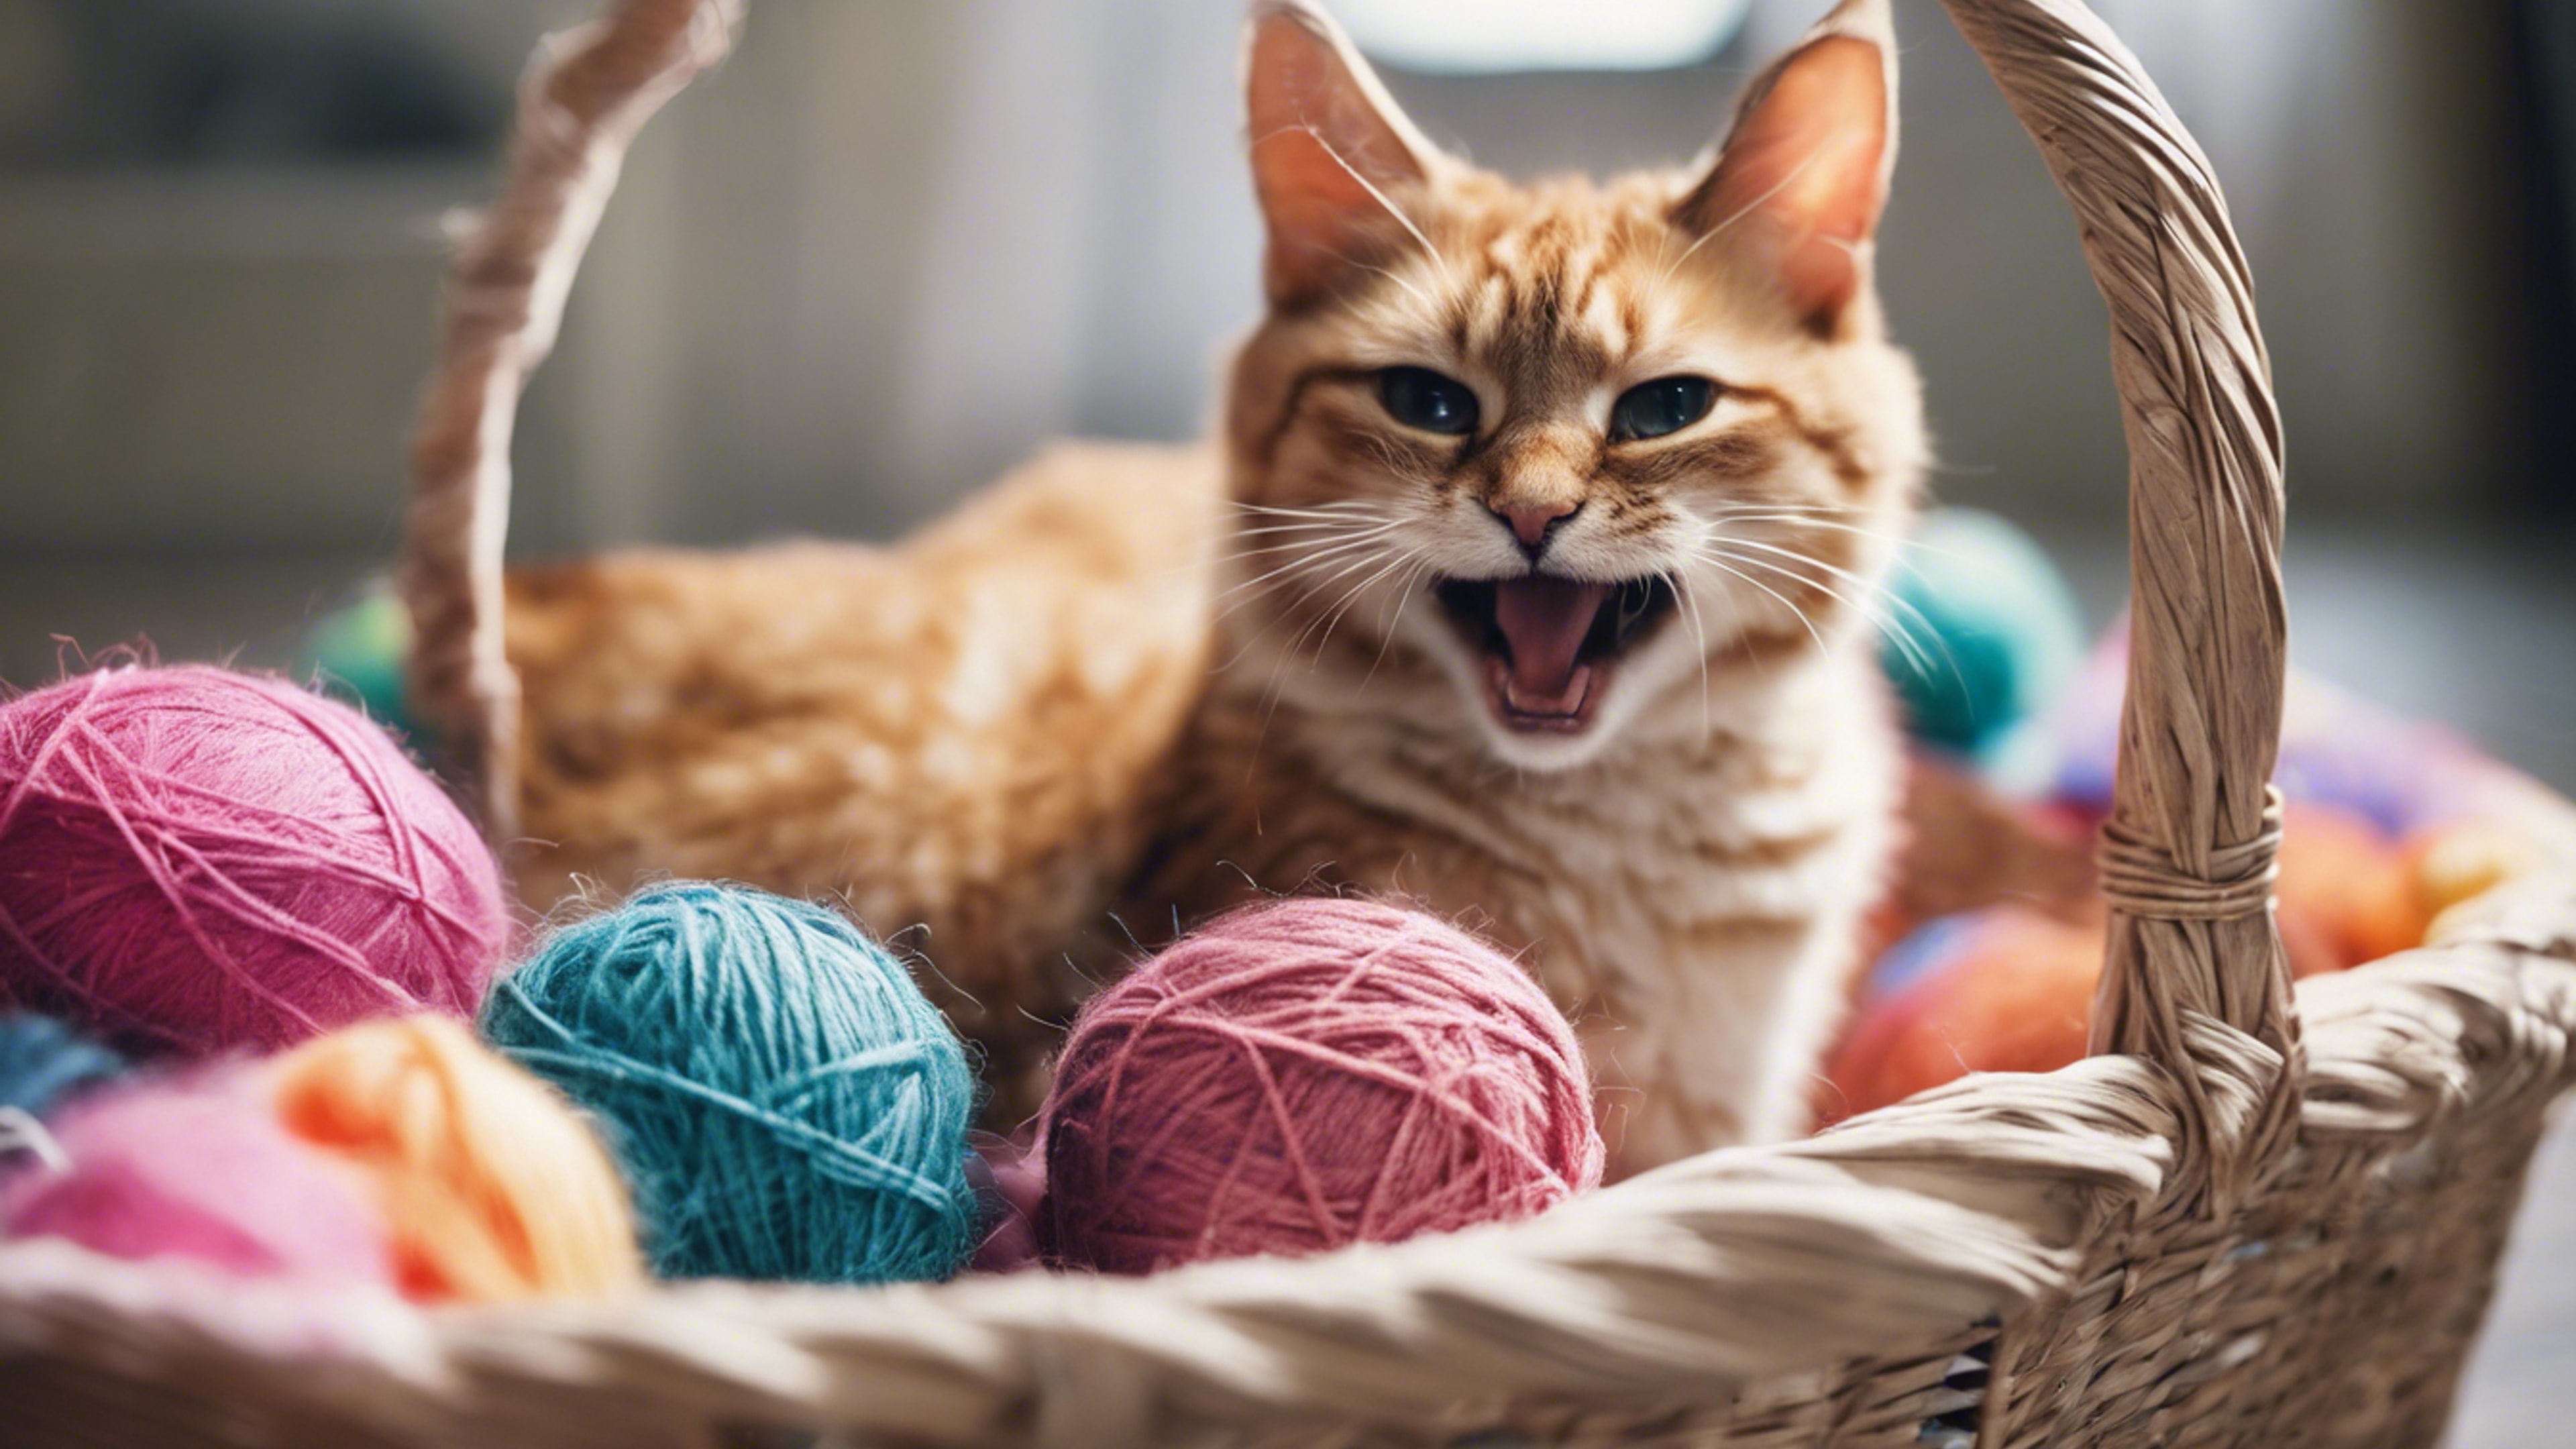 A cat mid-yawn in a basket filled with soft, colorful balls of yarn. Wallpaper[4de2b2f4a75d42f7bbf8]